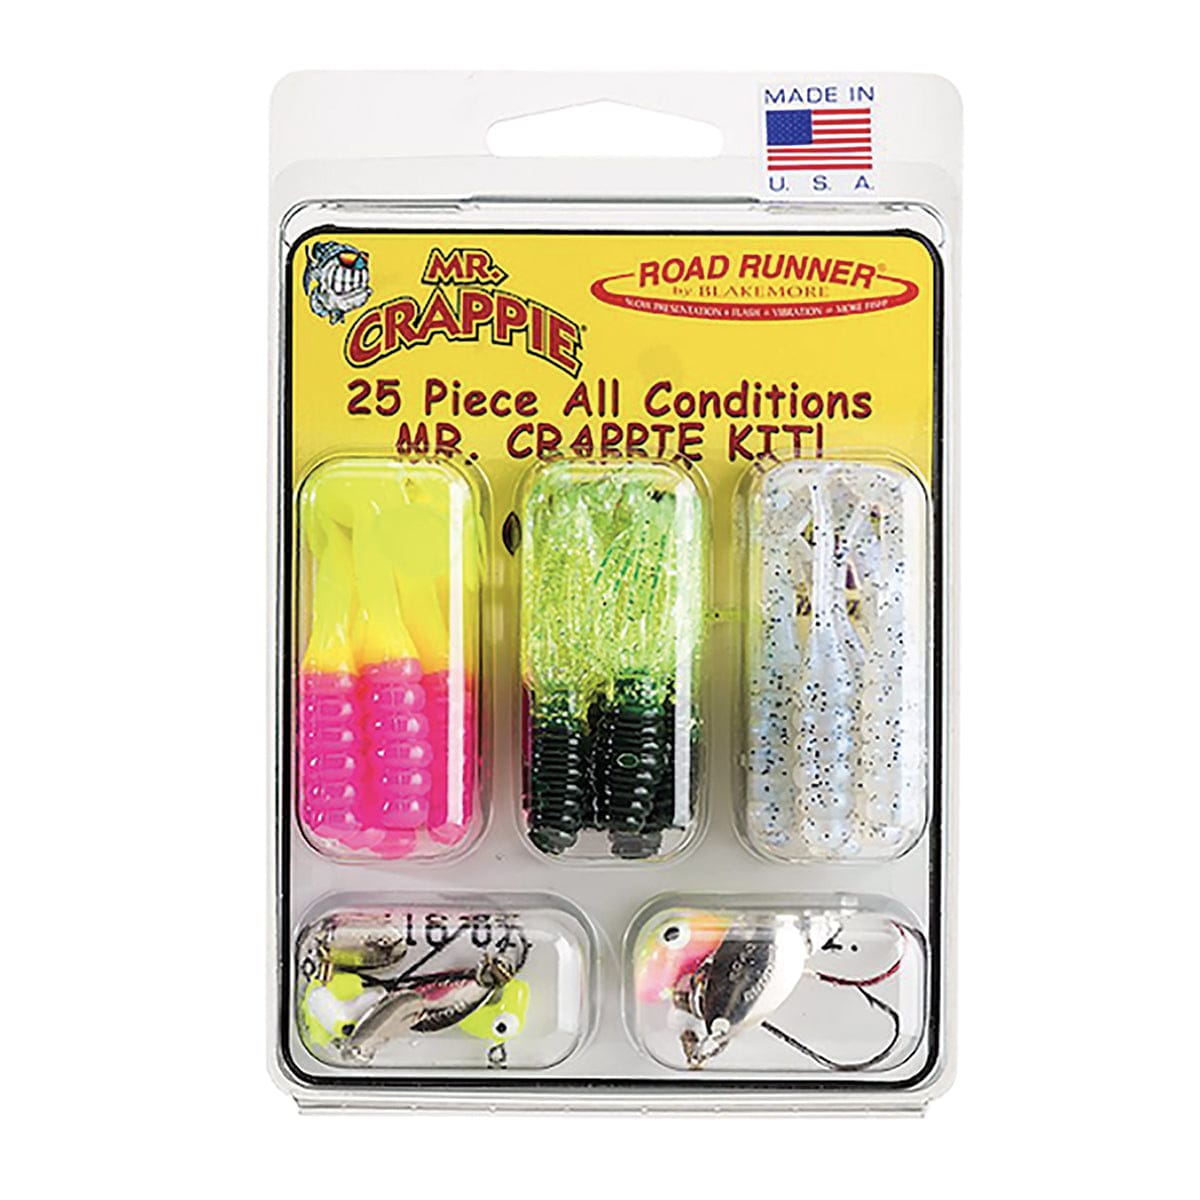 Team Crappie Road Runner All-Conditions Kit